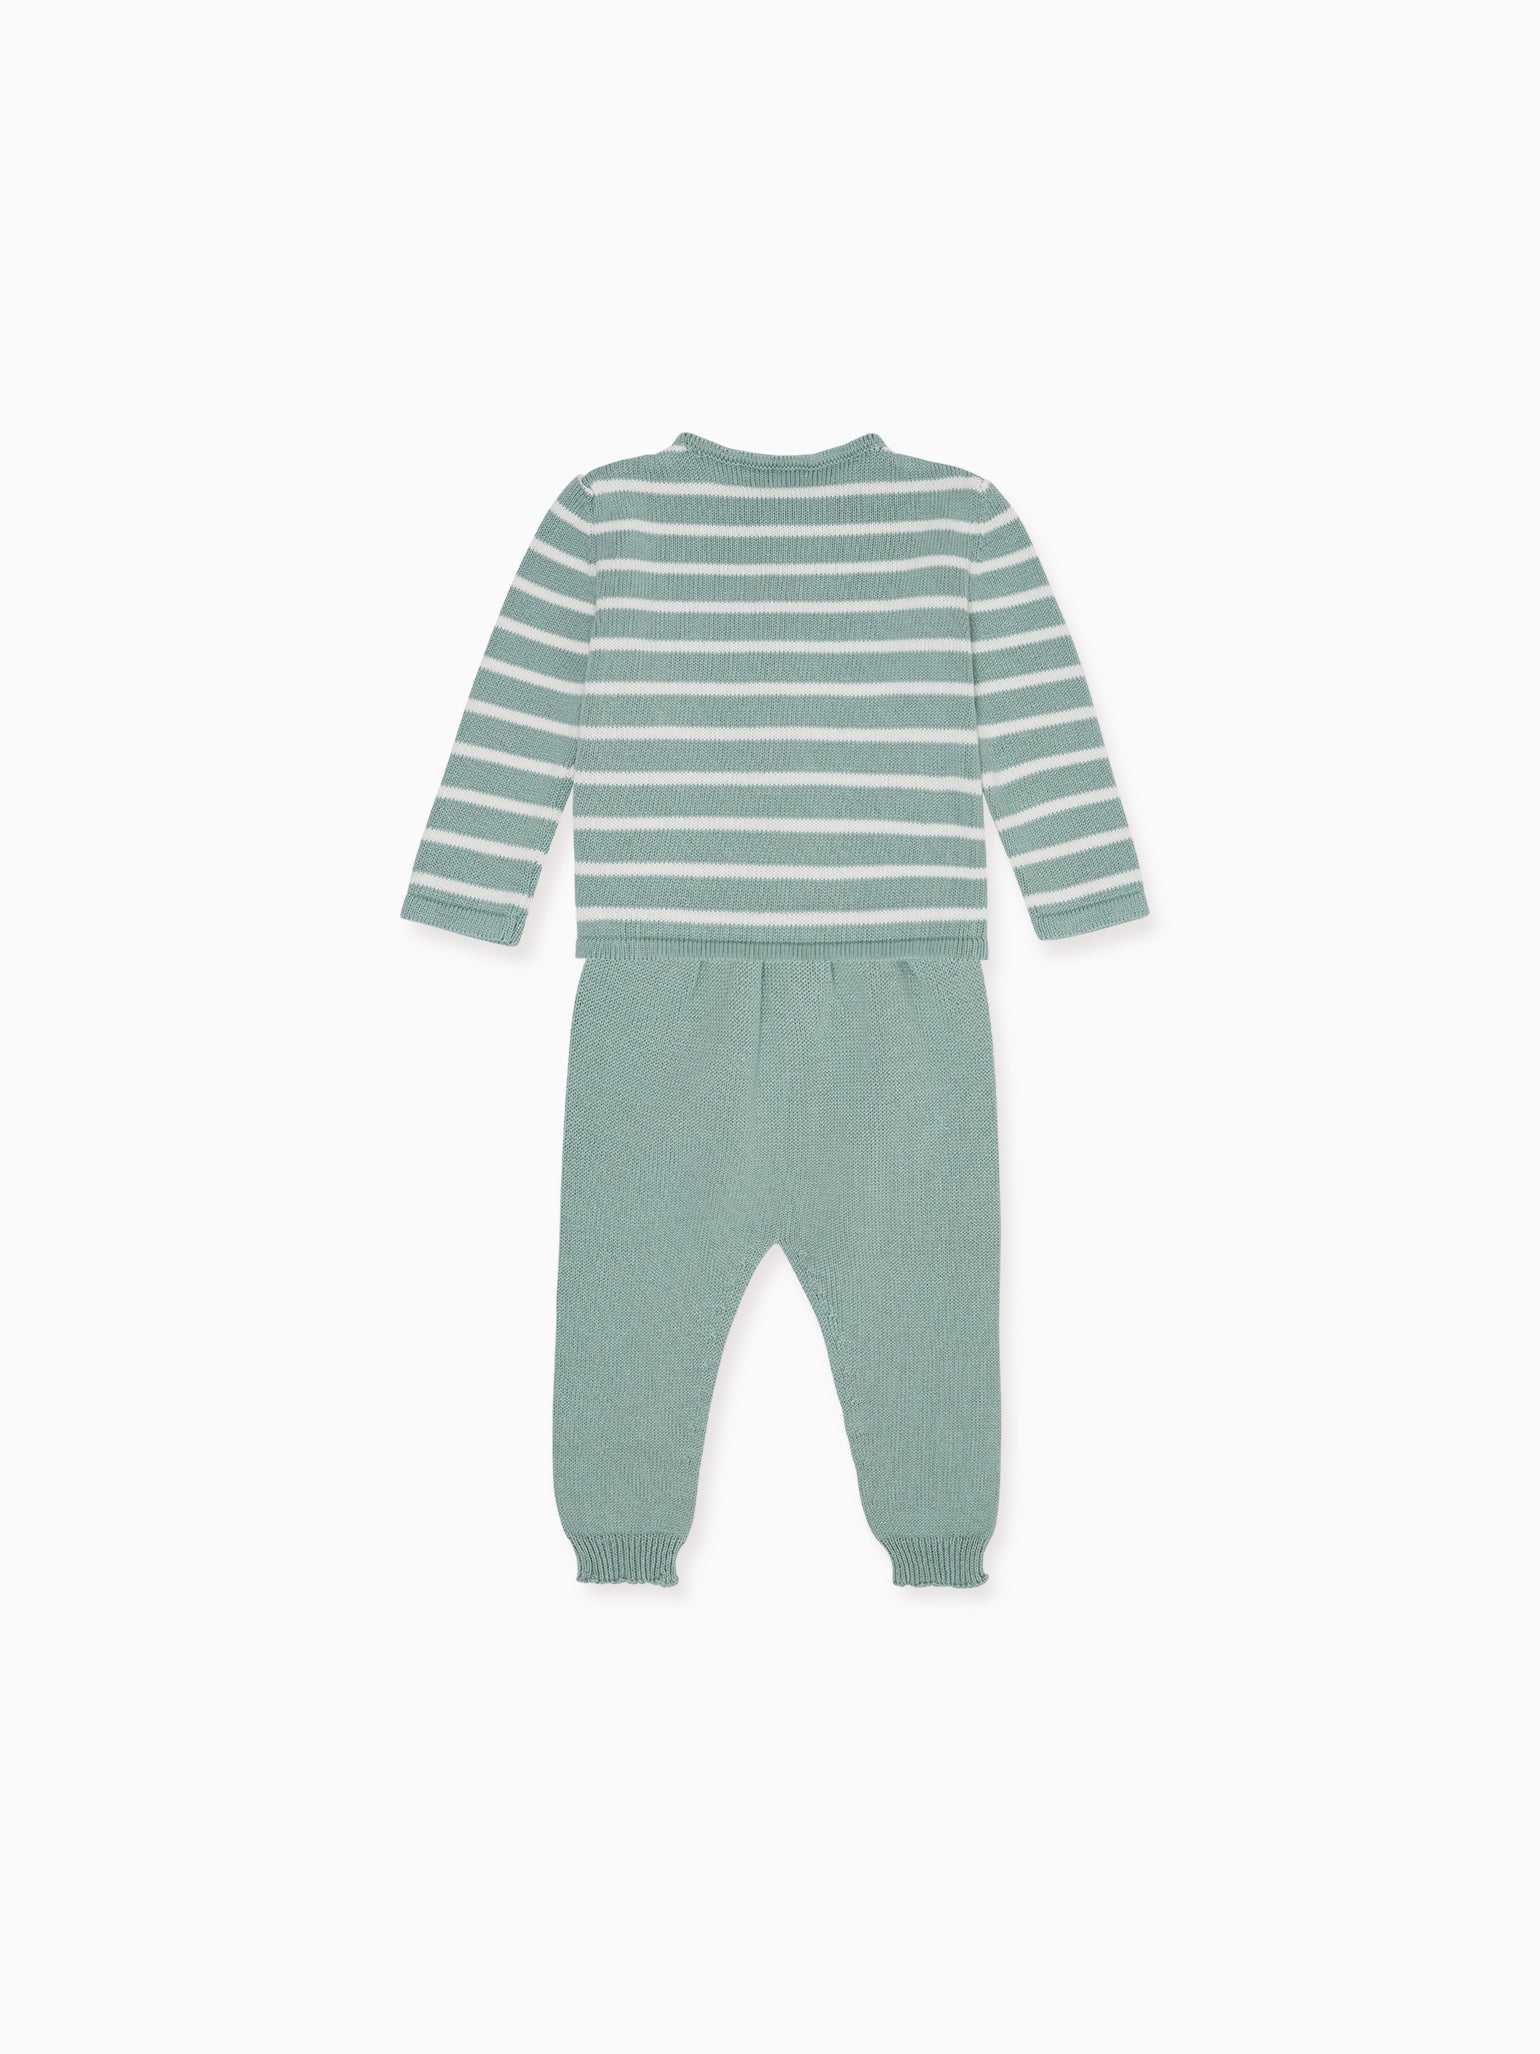 Sage Stripe Pinto Cotton Knitted Baby Set